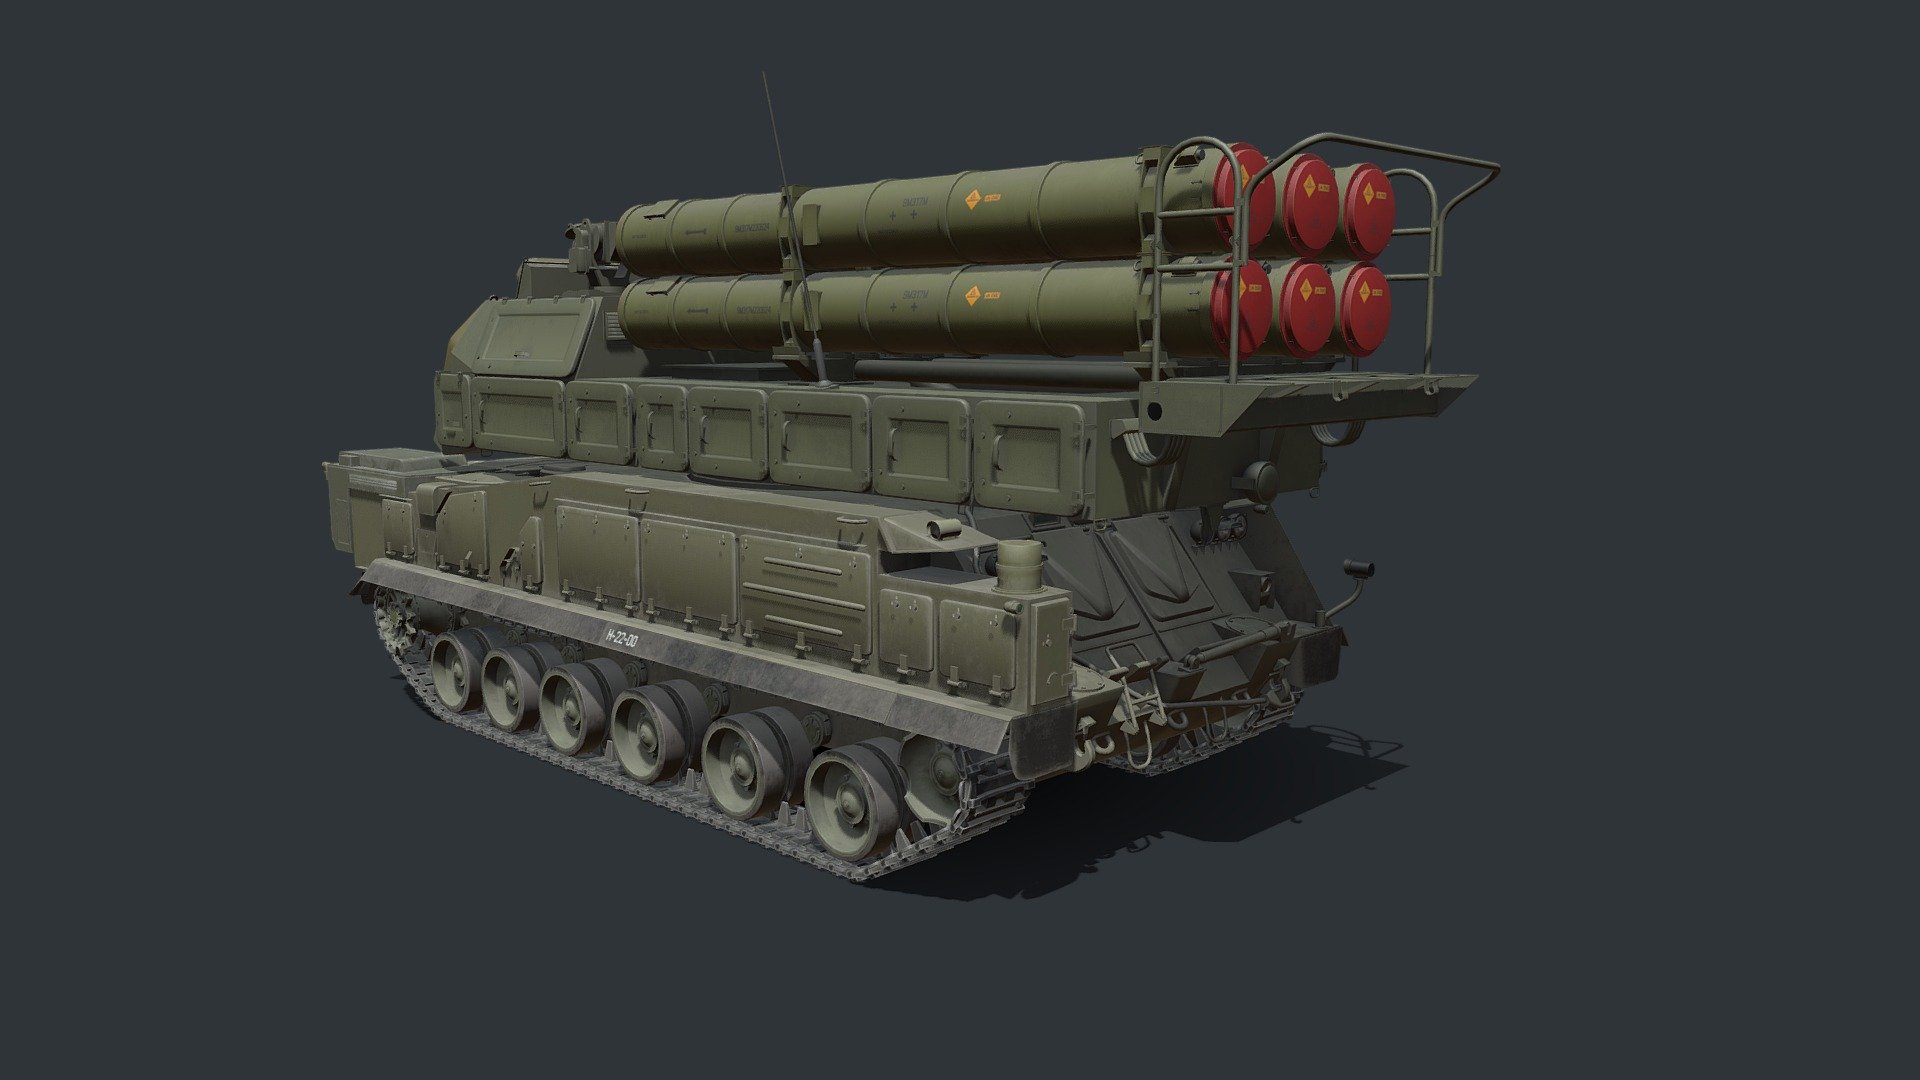 The Buk-M3E also nicknamed Viking, medium-range surface-to-air missile system is a modernized version of the Buk-M2 system, features advanced electronic components and a deadly new missile, and could be regarded as a completely new system. The system is designed, developed, and manufactured by the Russian Defense Company Almaz-Antey. The Buk-M3 system boasts a new digital computer, high-speed data exchange system and a tele-thermal imaging target designator instead of the tele-optical trackers used in previous models. A battery of Buk-M3 missiles can track and engage up to 36 targets simultaneously, while its advanced 9R31M missile is capable of knocking down all existing flying objects, including highly maneuverable ones, even during active electronic jamming - Buk M3 SA-17 Viking missile systems - Buy Royalty Free 3D model by Tim Samedov (@citizensnip) 3d model